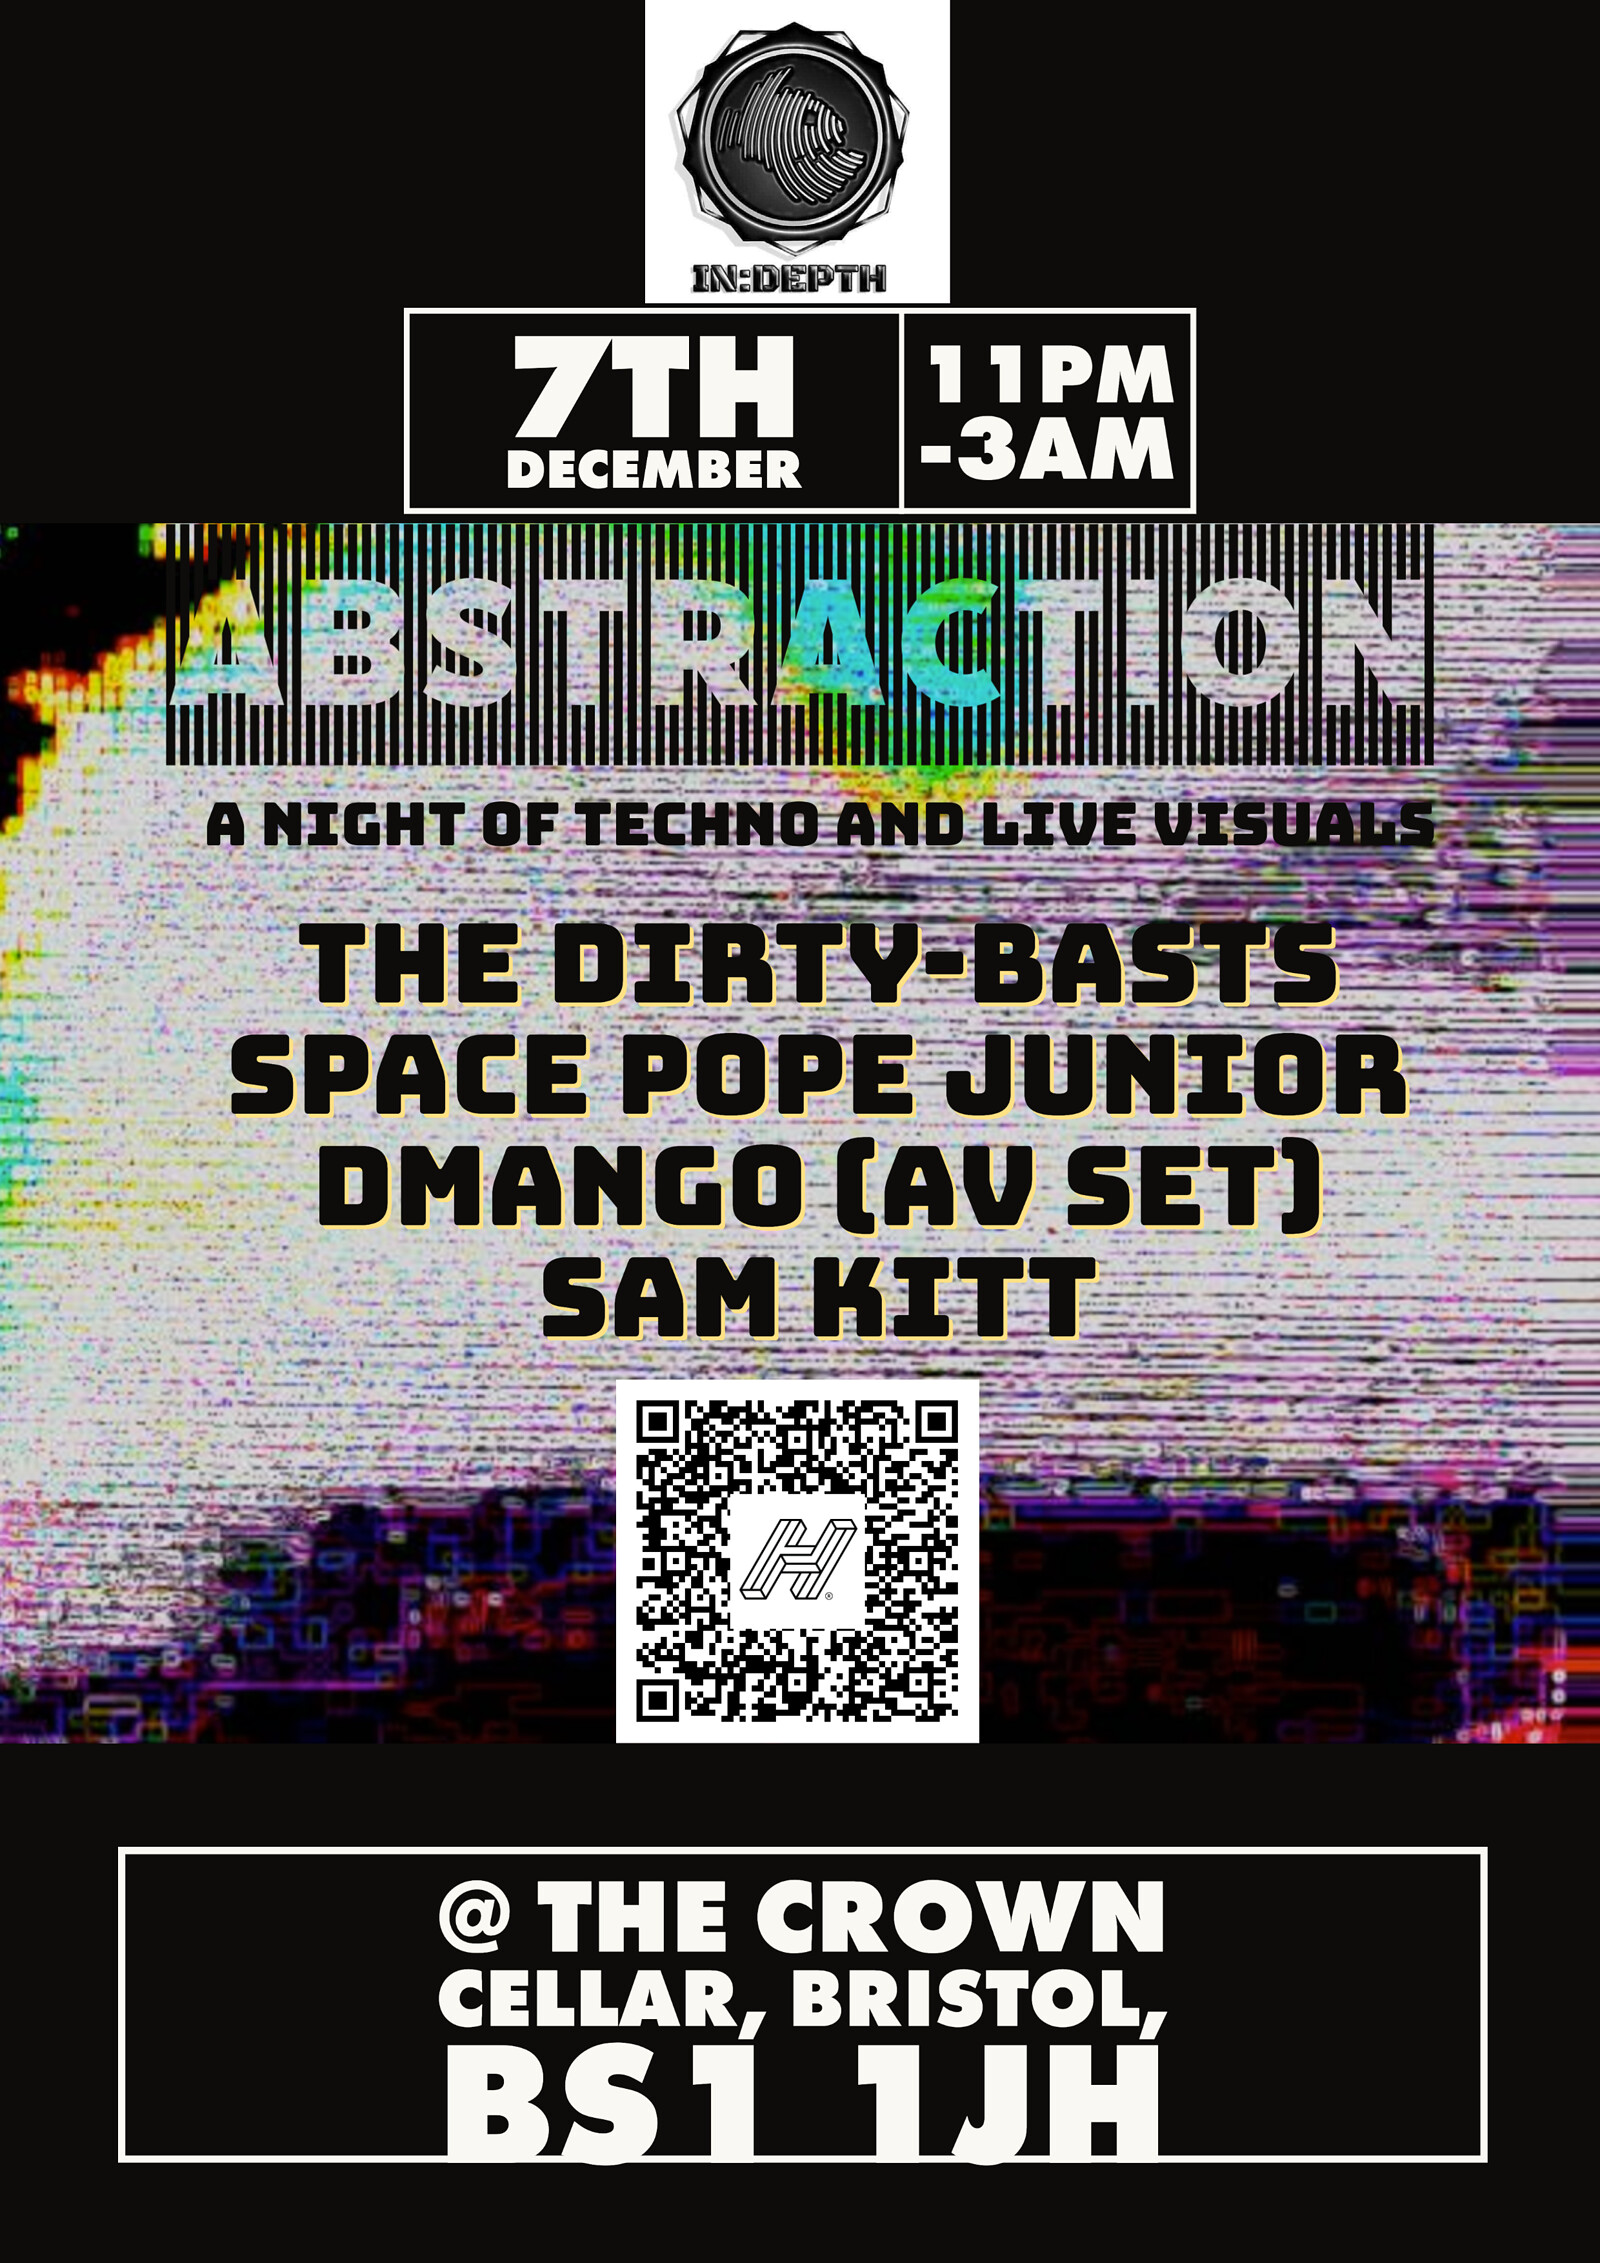 In-depth Presents: ABSTRACTION at The Crown